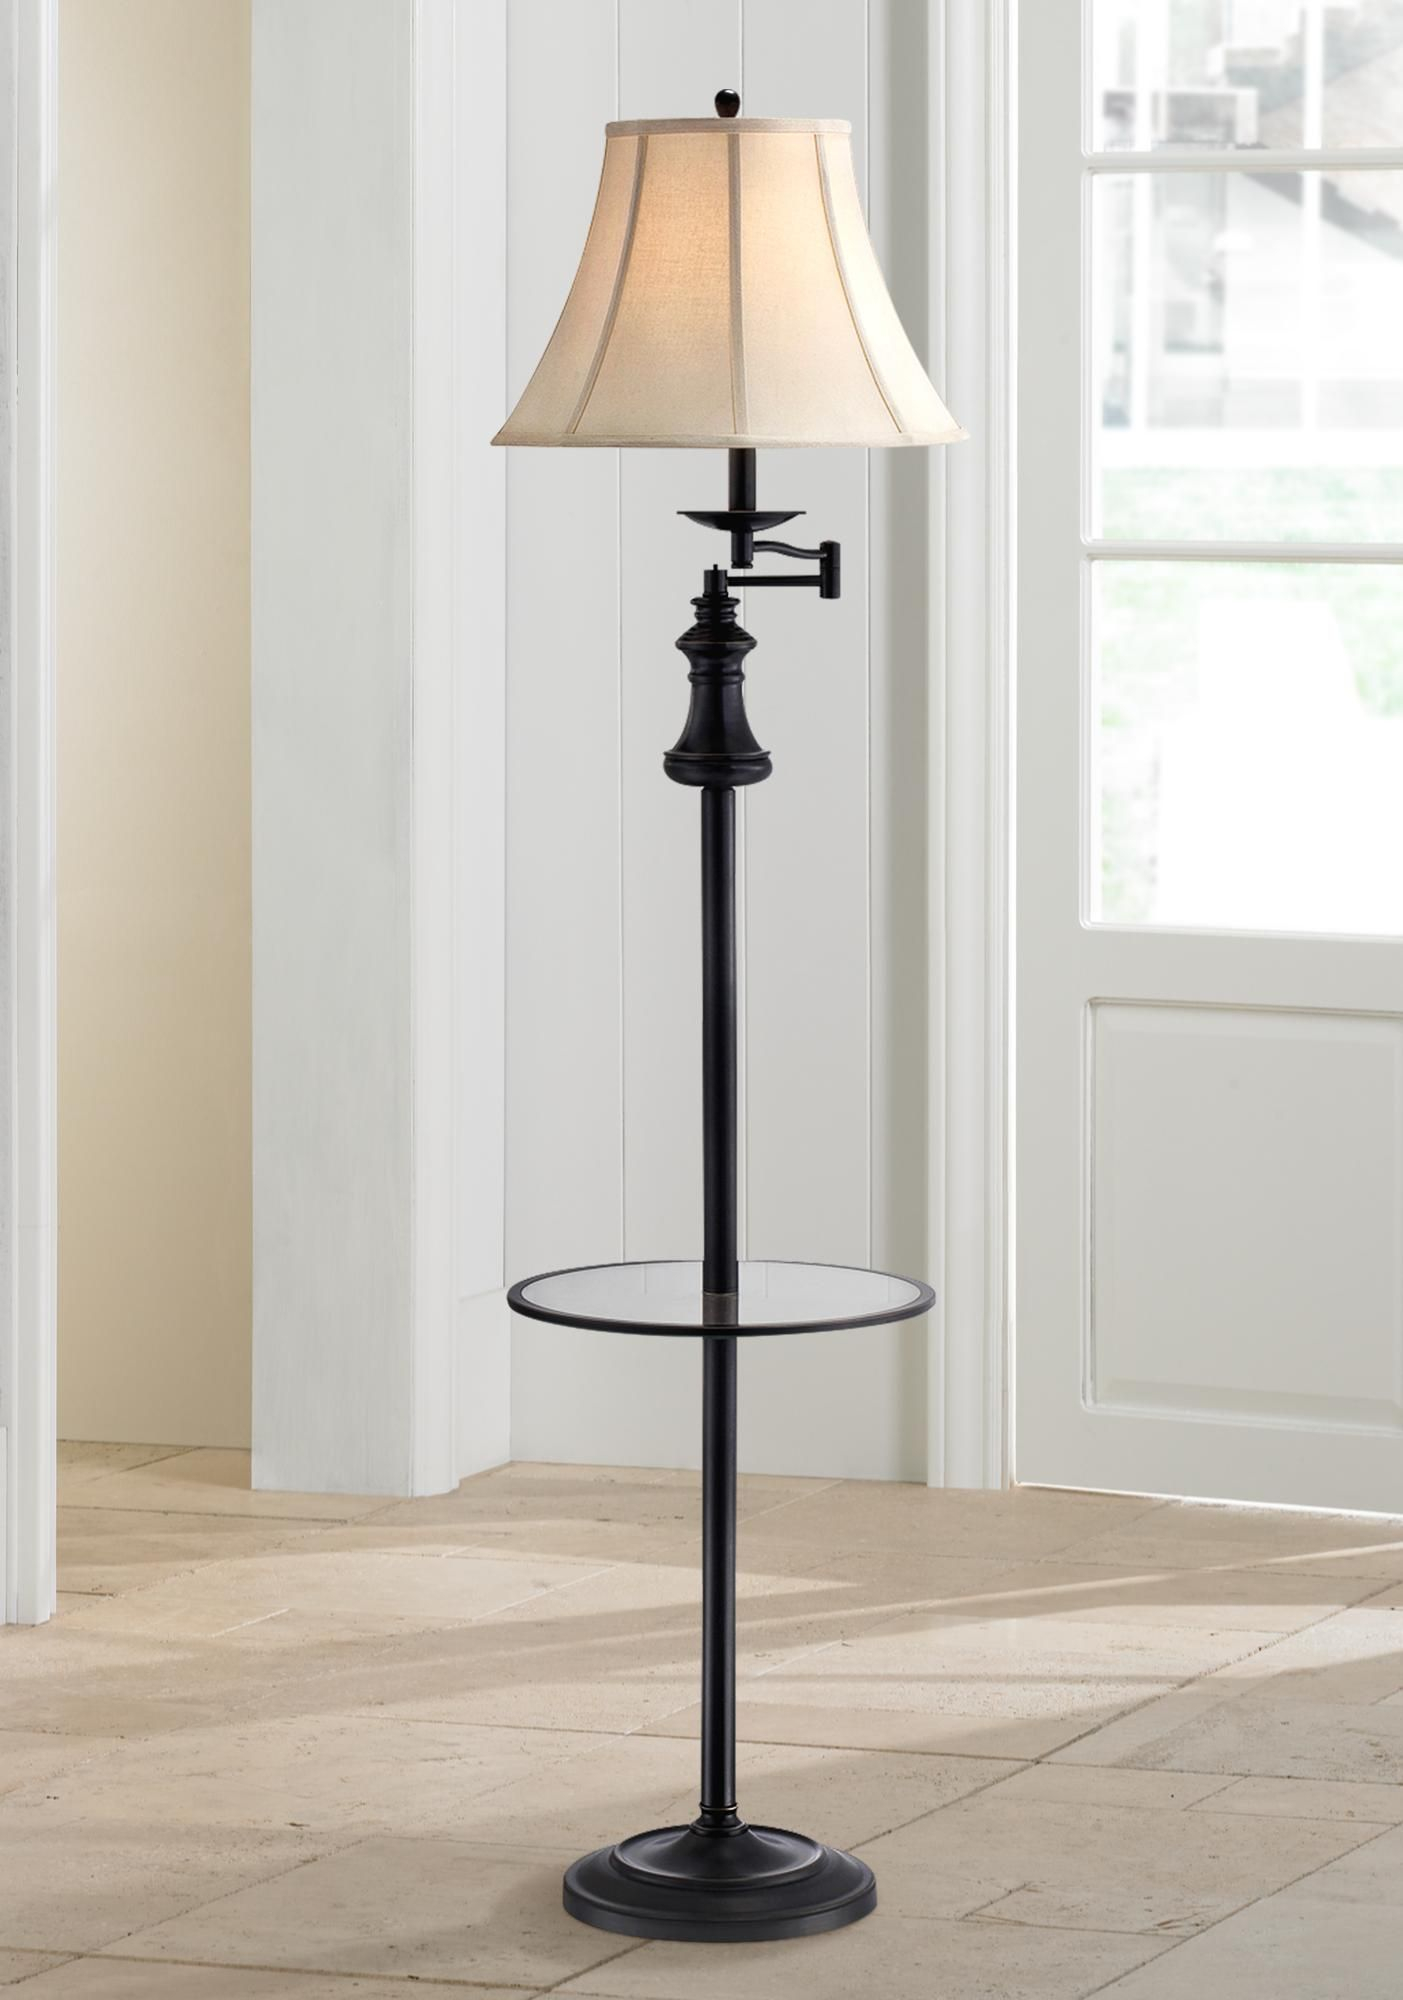 Lite Source Brandice Swing Arm Floor Lamp With Table Tray within dimensions 1403 X 2000